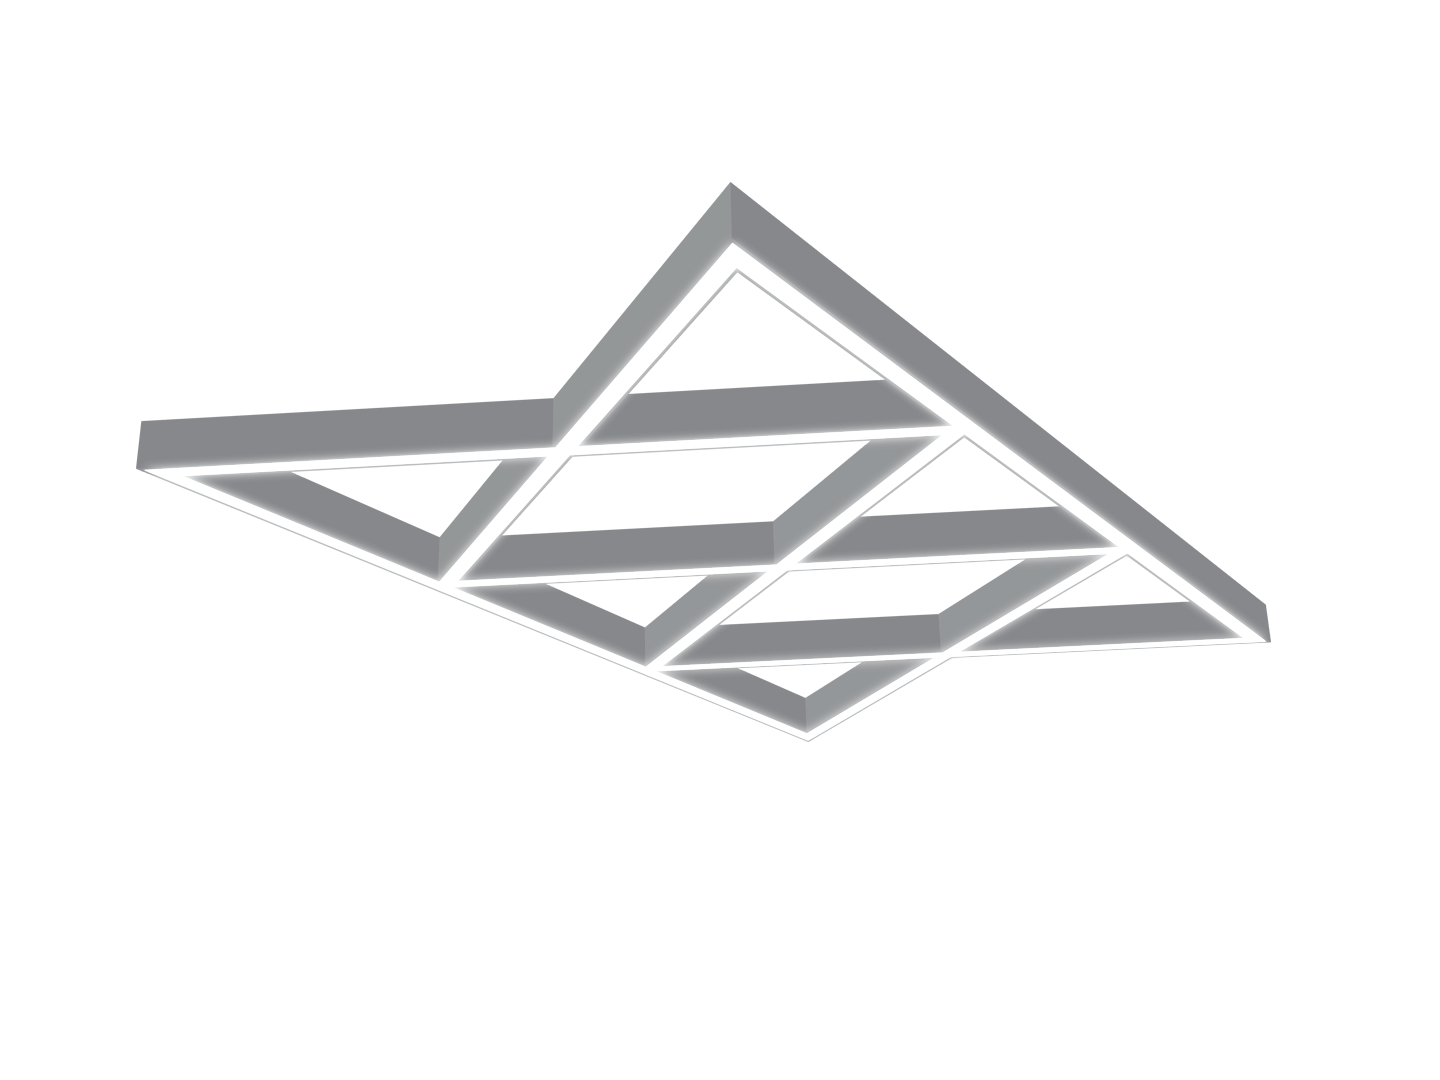 light fixture with 6 triangles placed together to form a mesh pattern